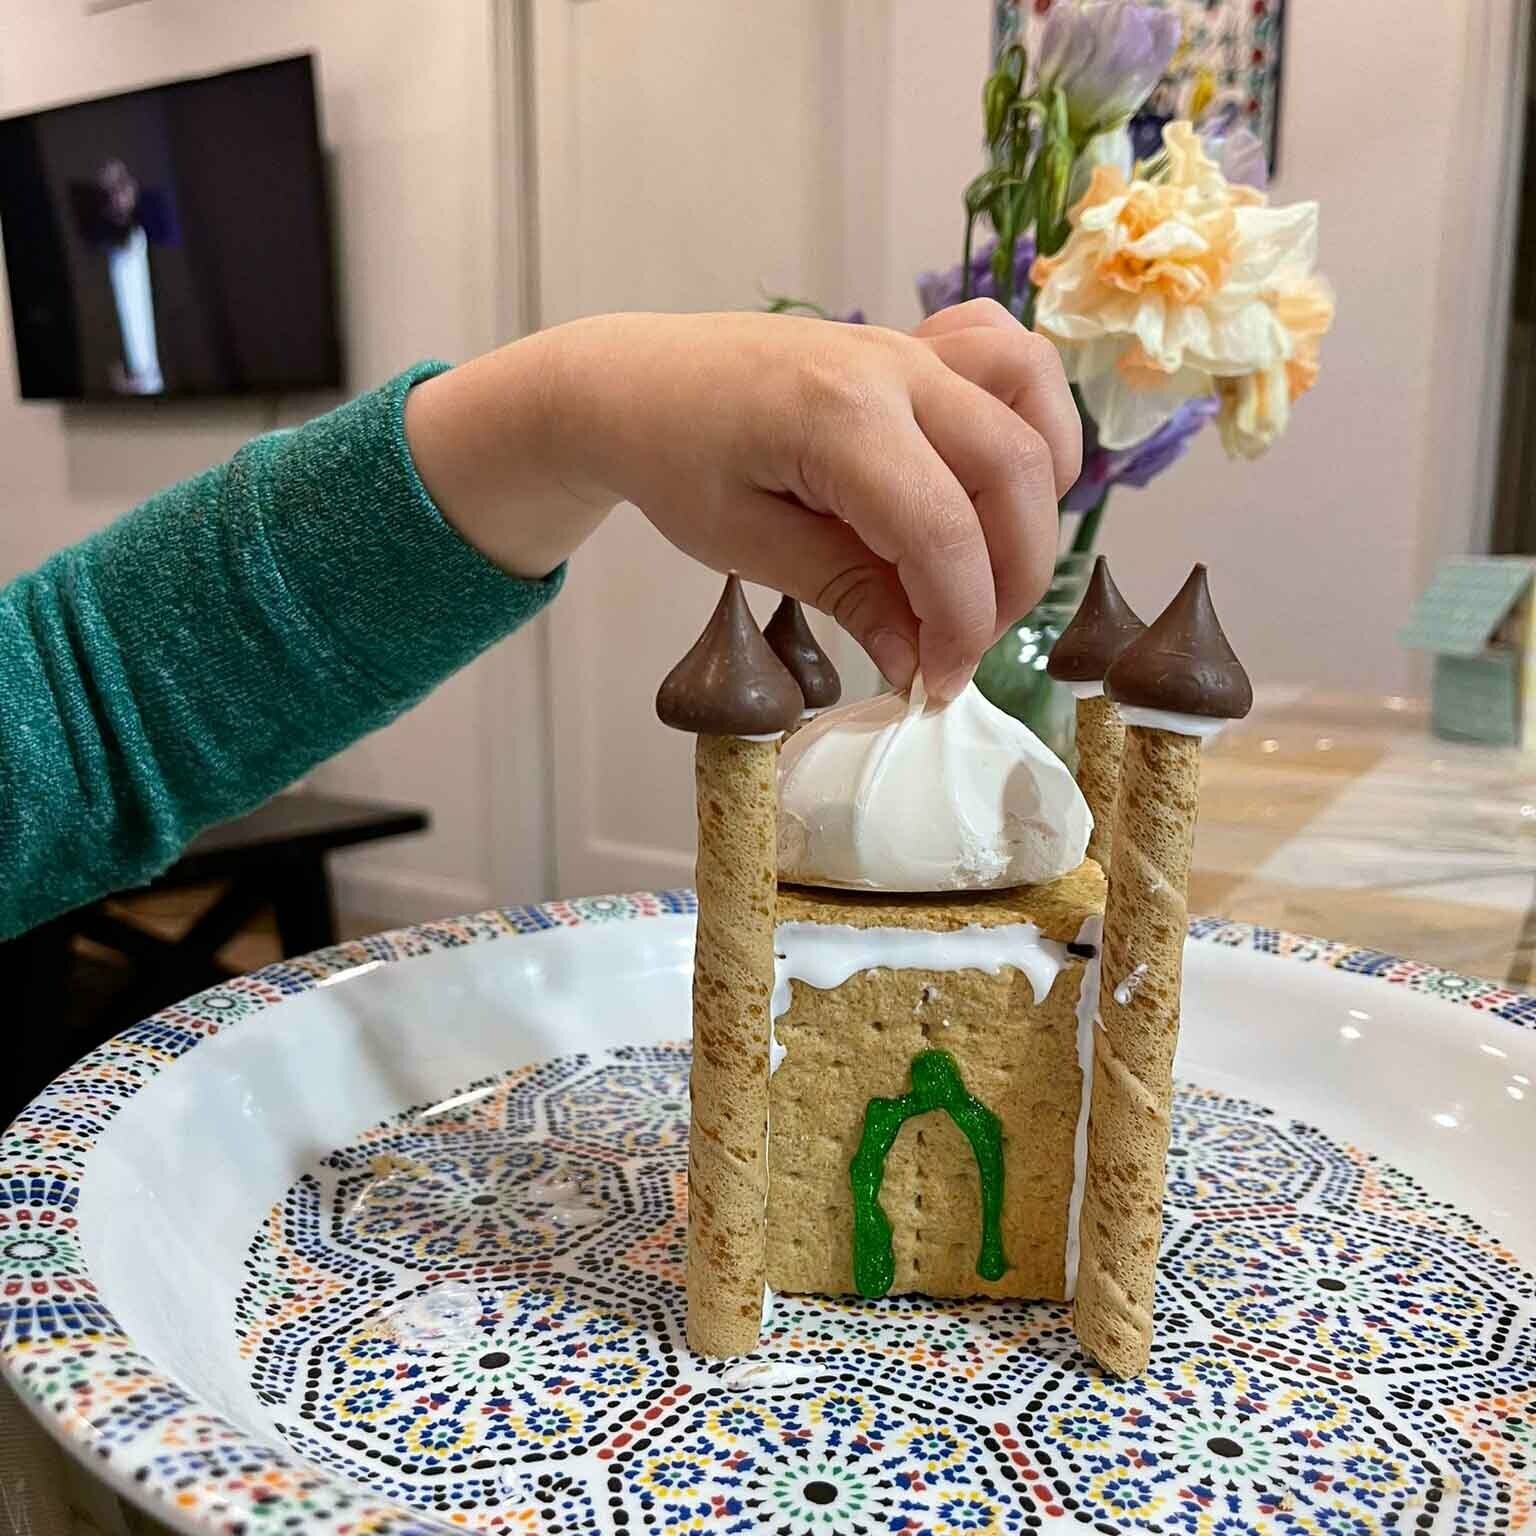 A child's hand gently holds an edible mosque structure about 5 inches high, constructed of graham crackers and minarets made of chocolate, standing on a table 